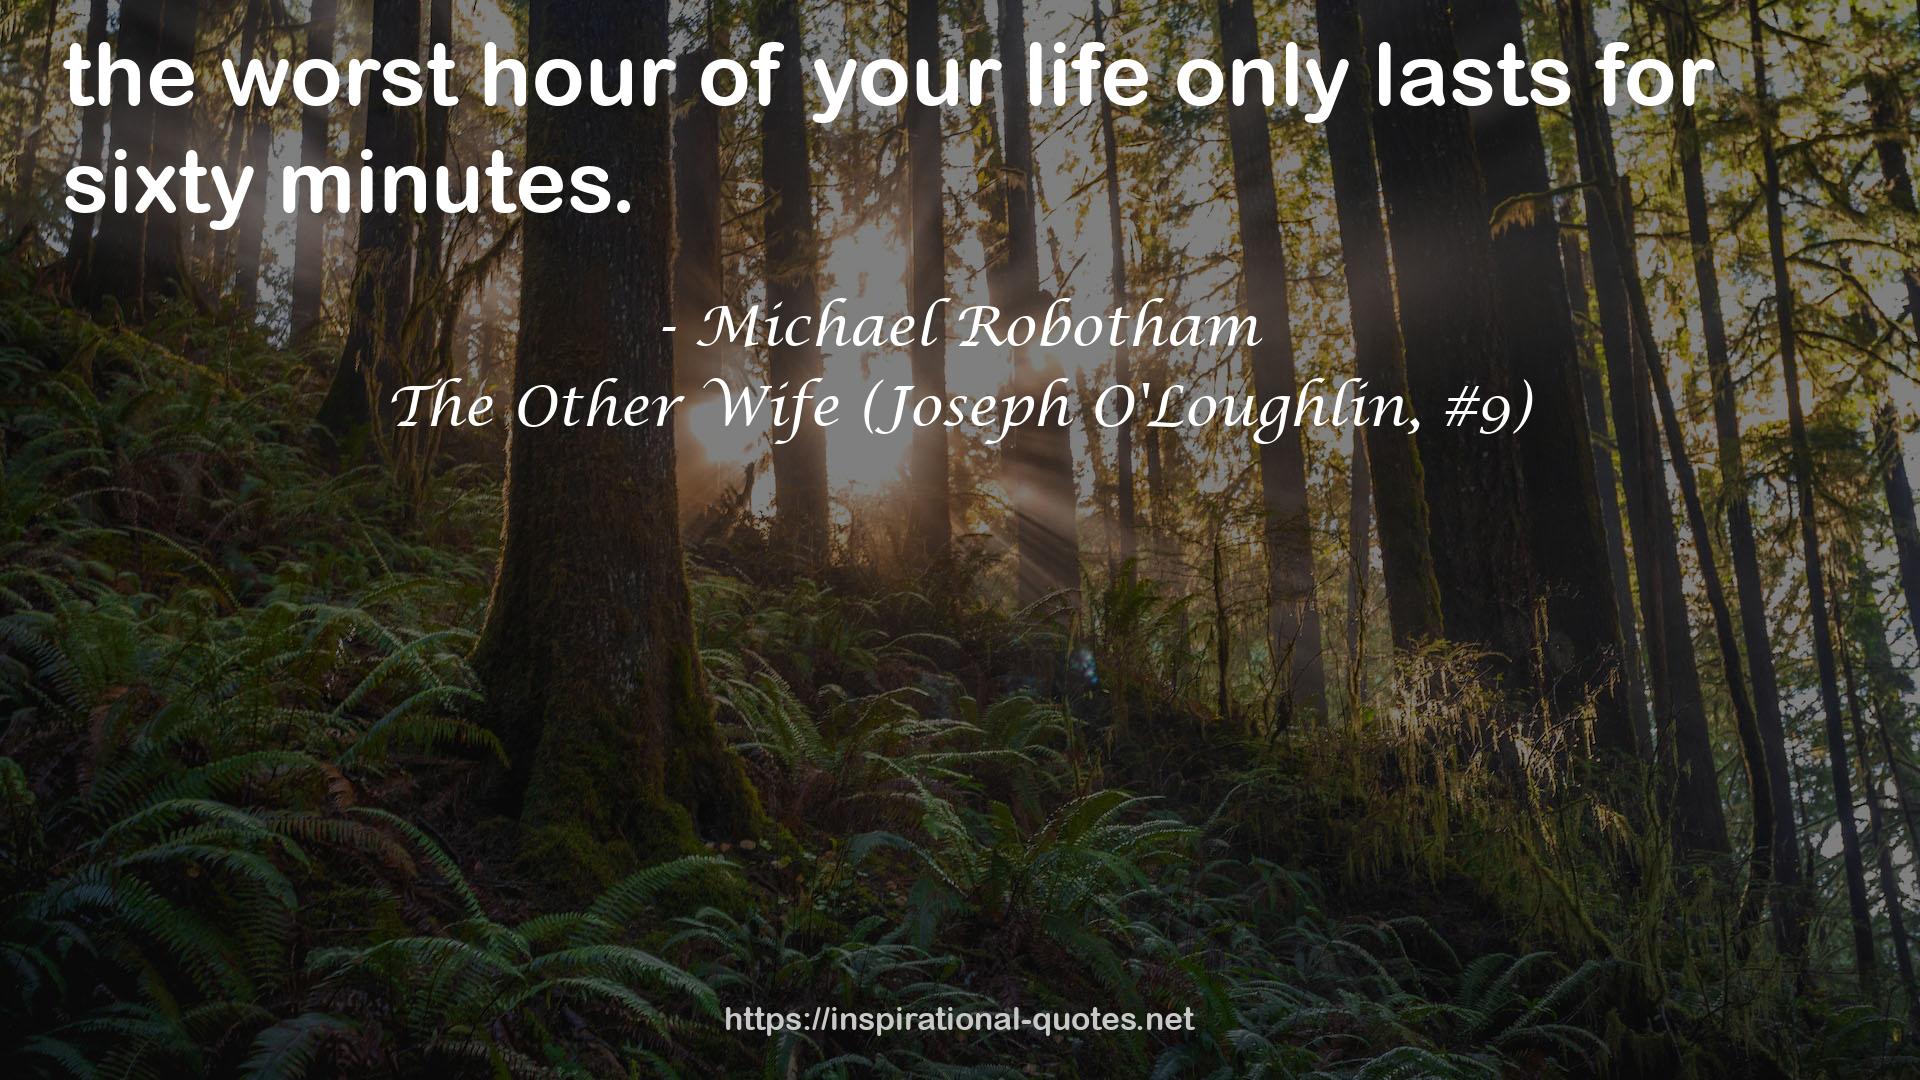 The Other Wife (Joseph O'Loughlin, #9) QUOTES